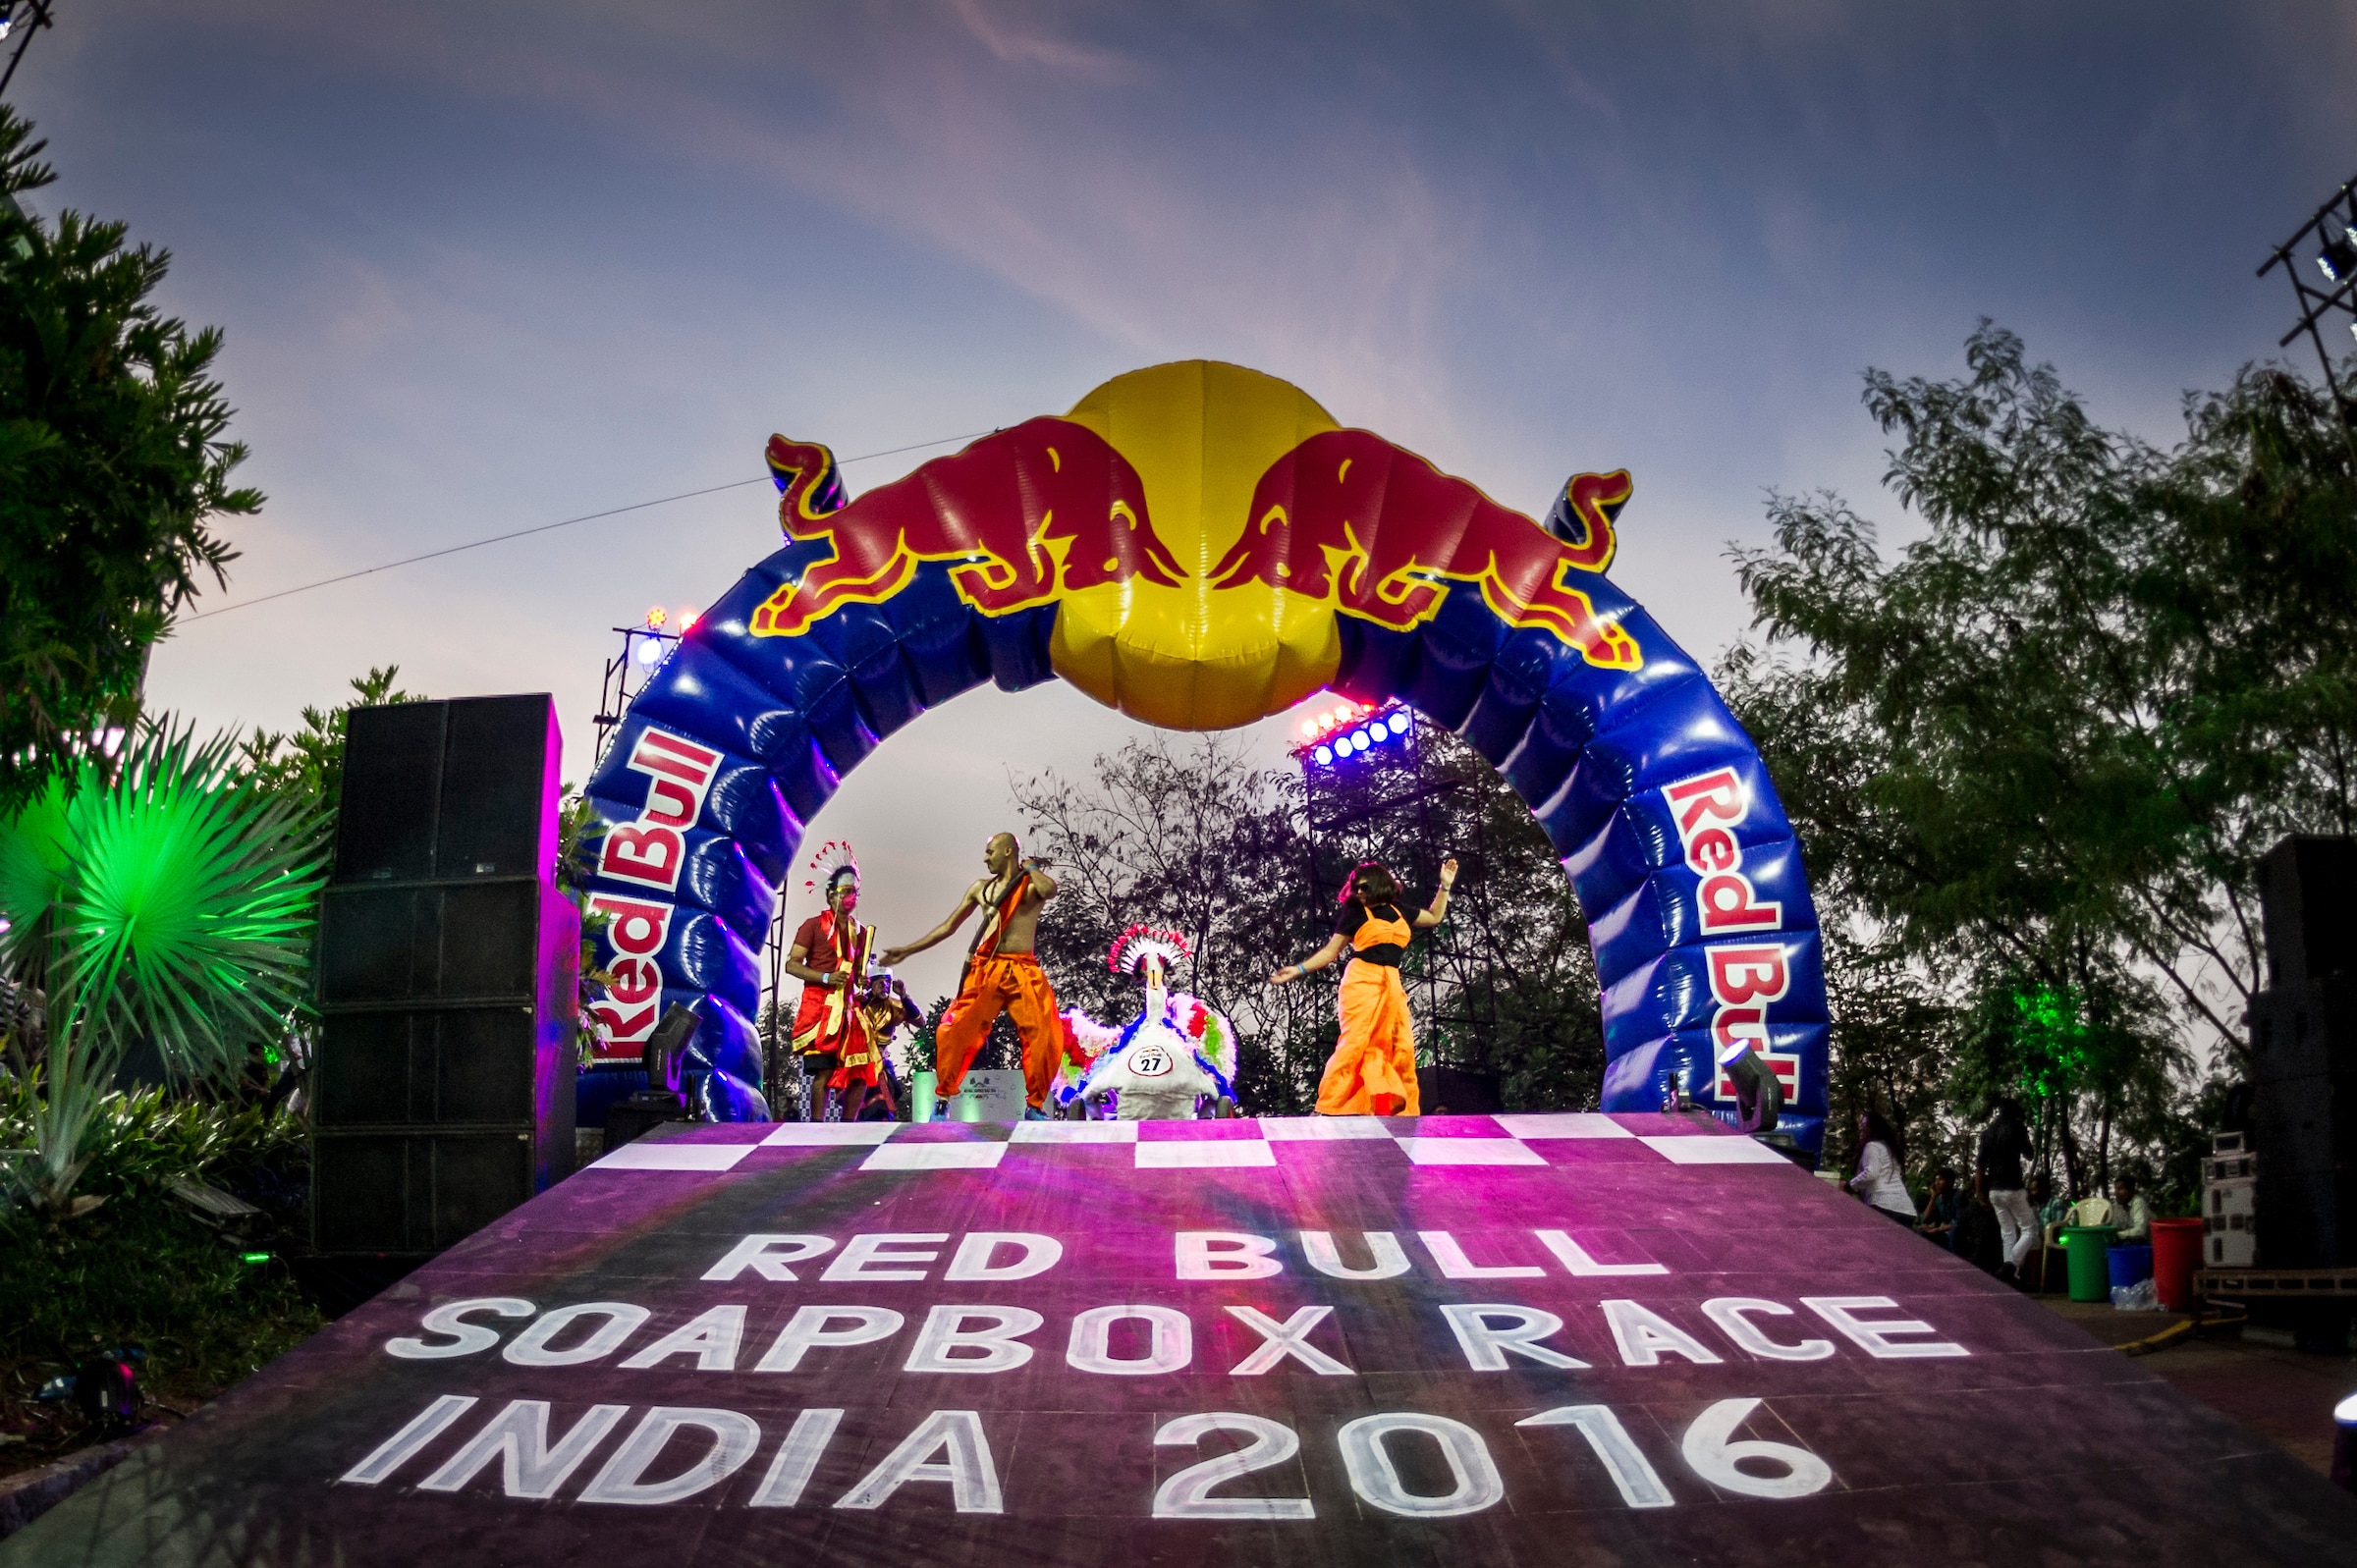 Participants-perform-during-the-Red-Bull-Soapbox-Race-2016-in-Mumbai-India